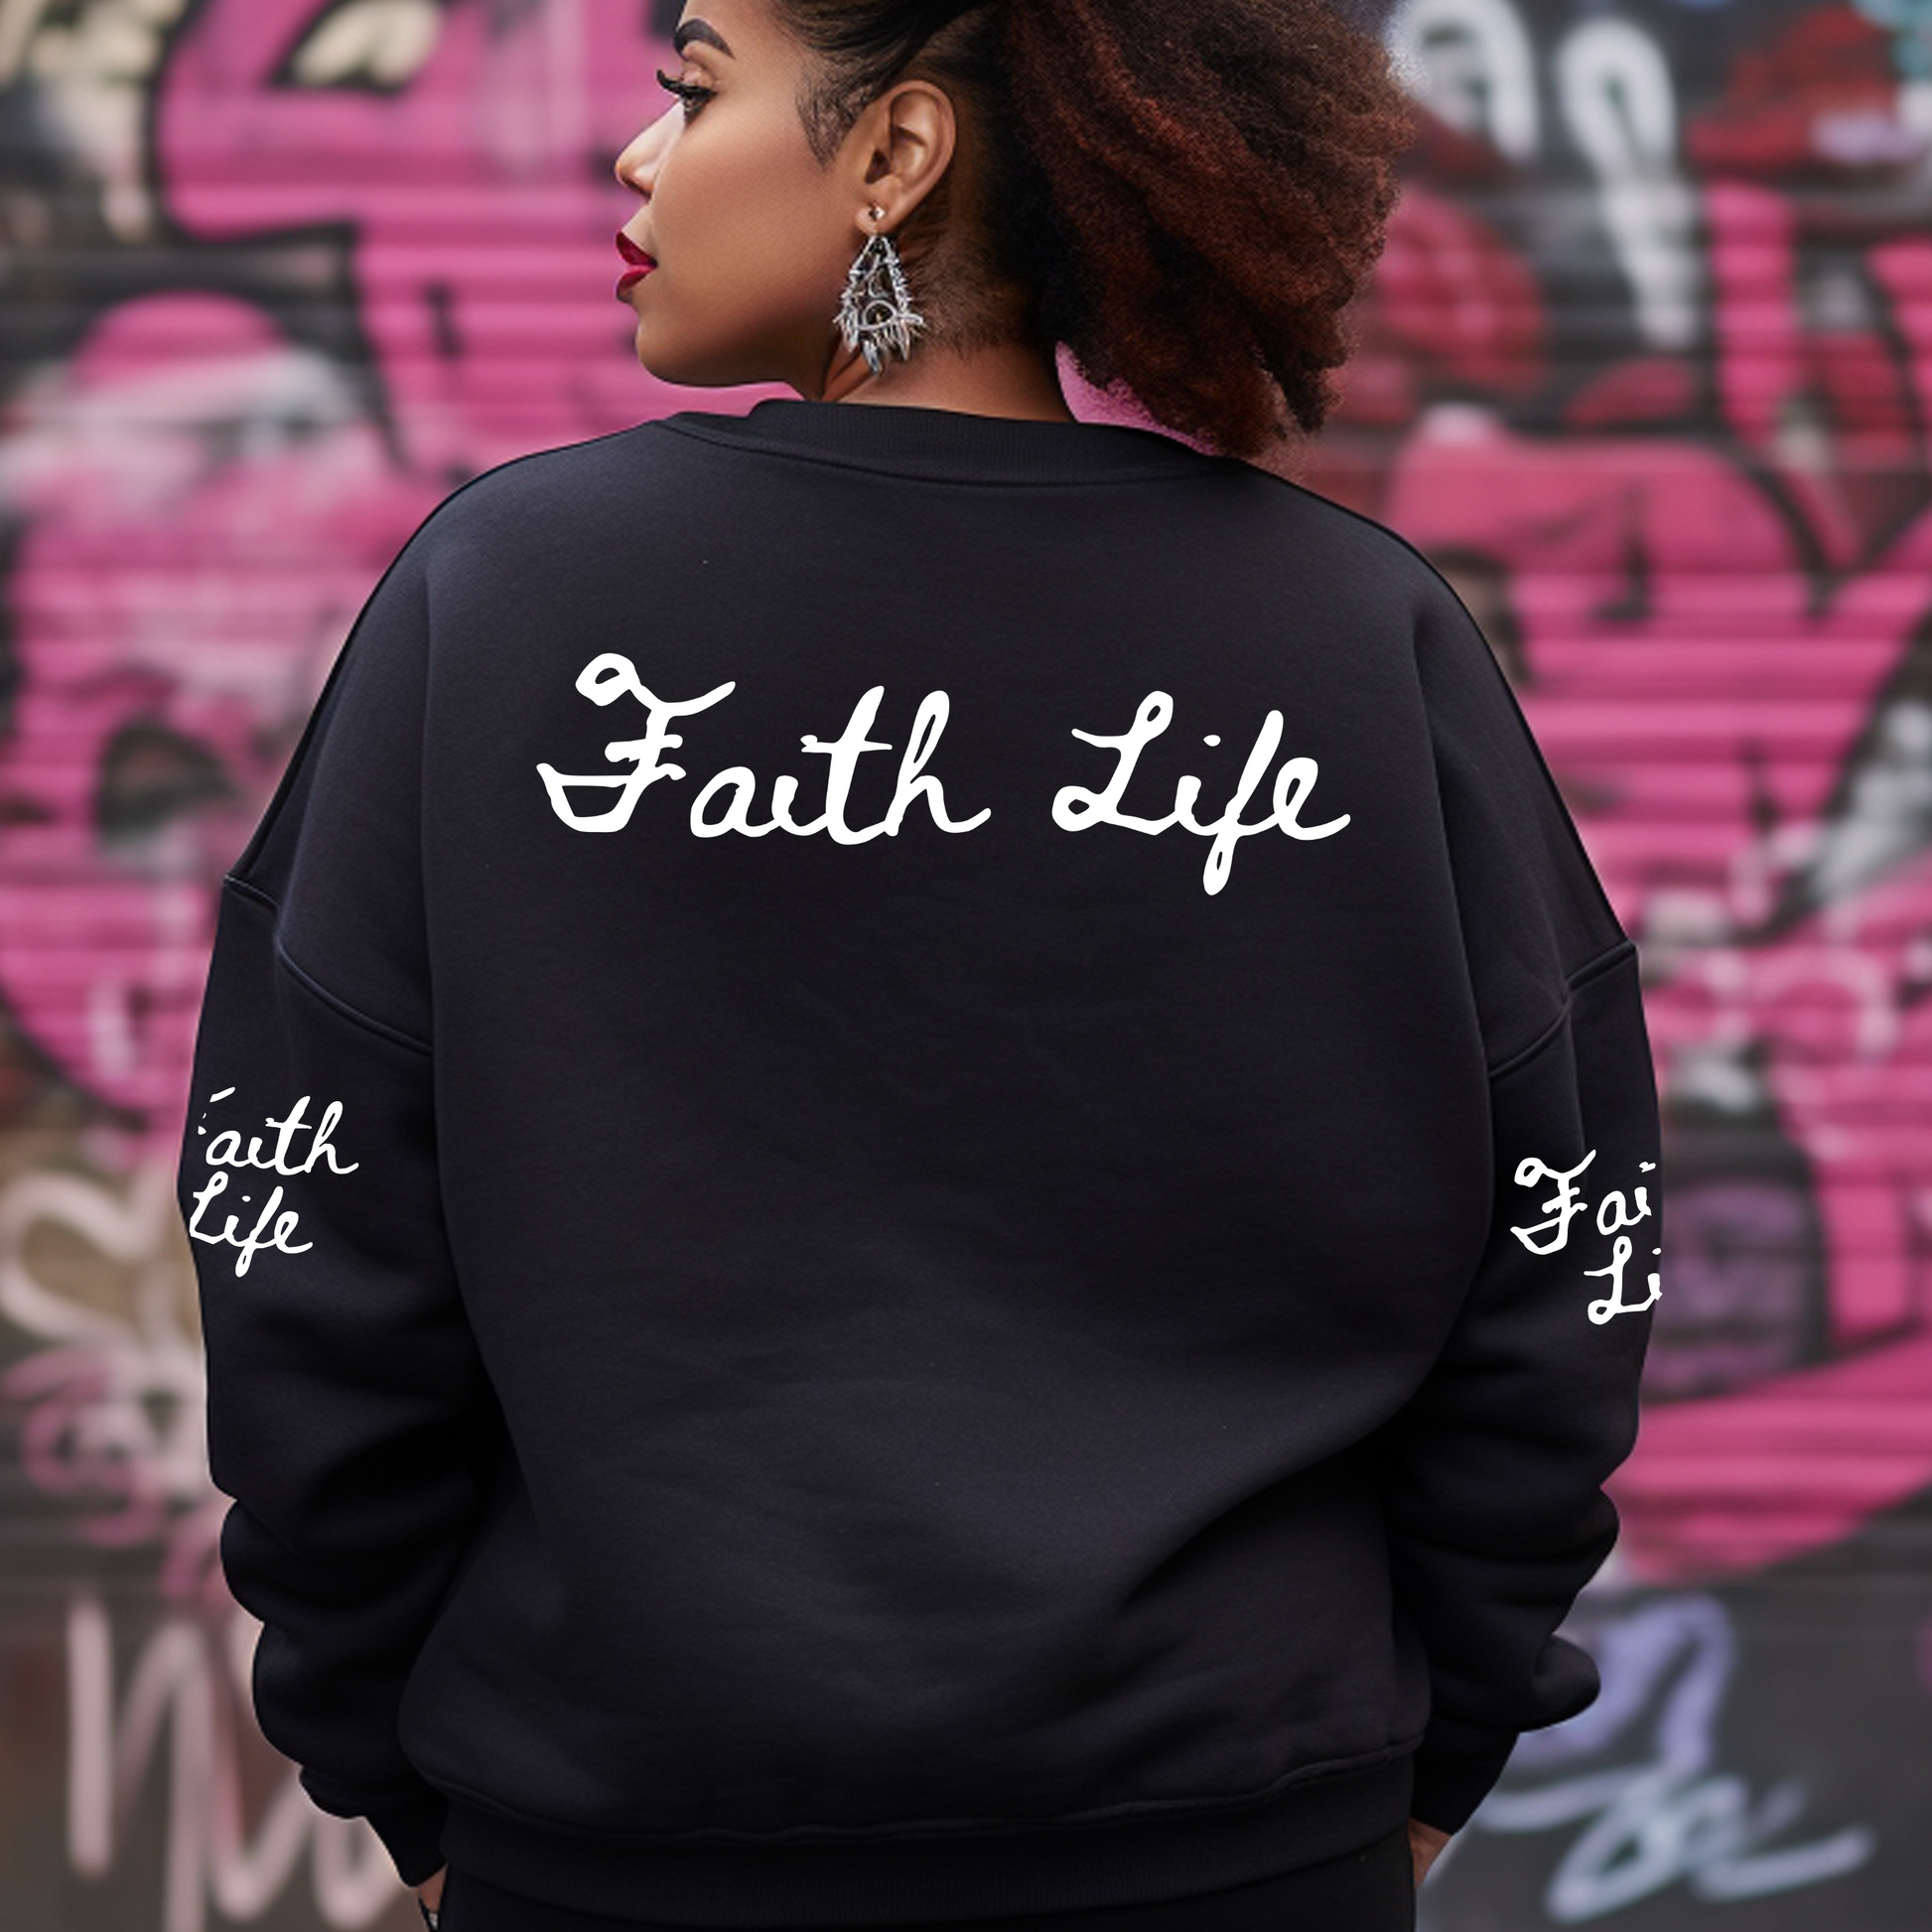 Back of our Faith it til you make it black crewneck sweatshirt with the words Faith Life. Wear our comfortable faith clothing if you're a believer who knows you have the faith to overcome anything. This special sweatshirt is cozy and soft enough to wear day to day.